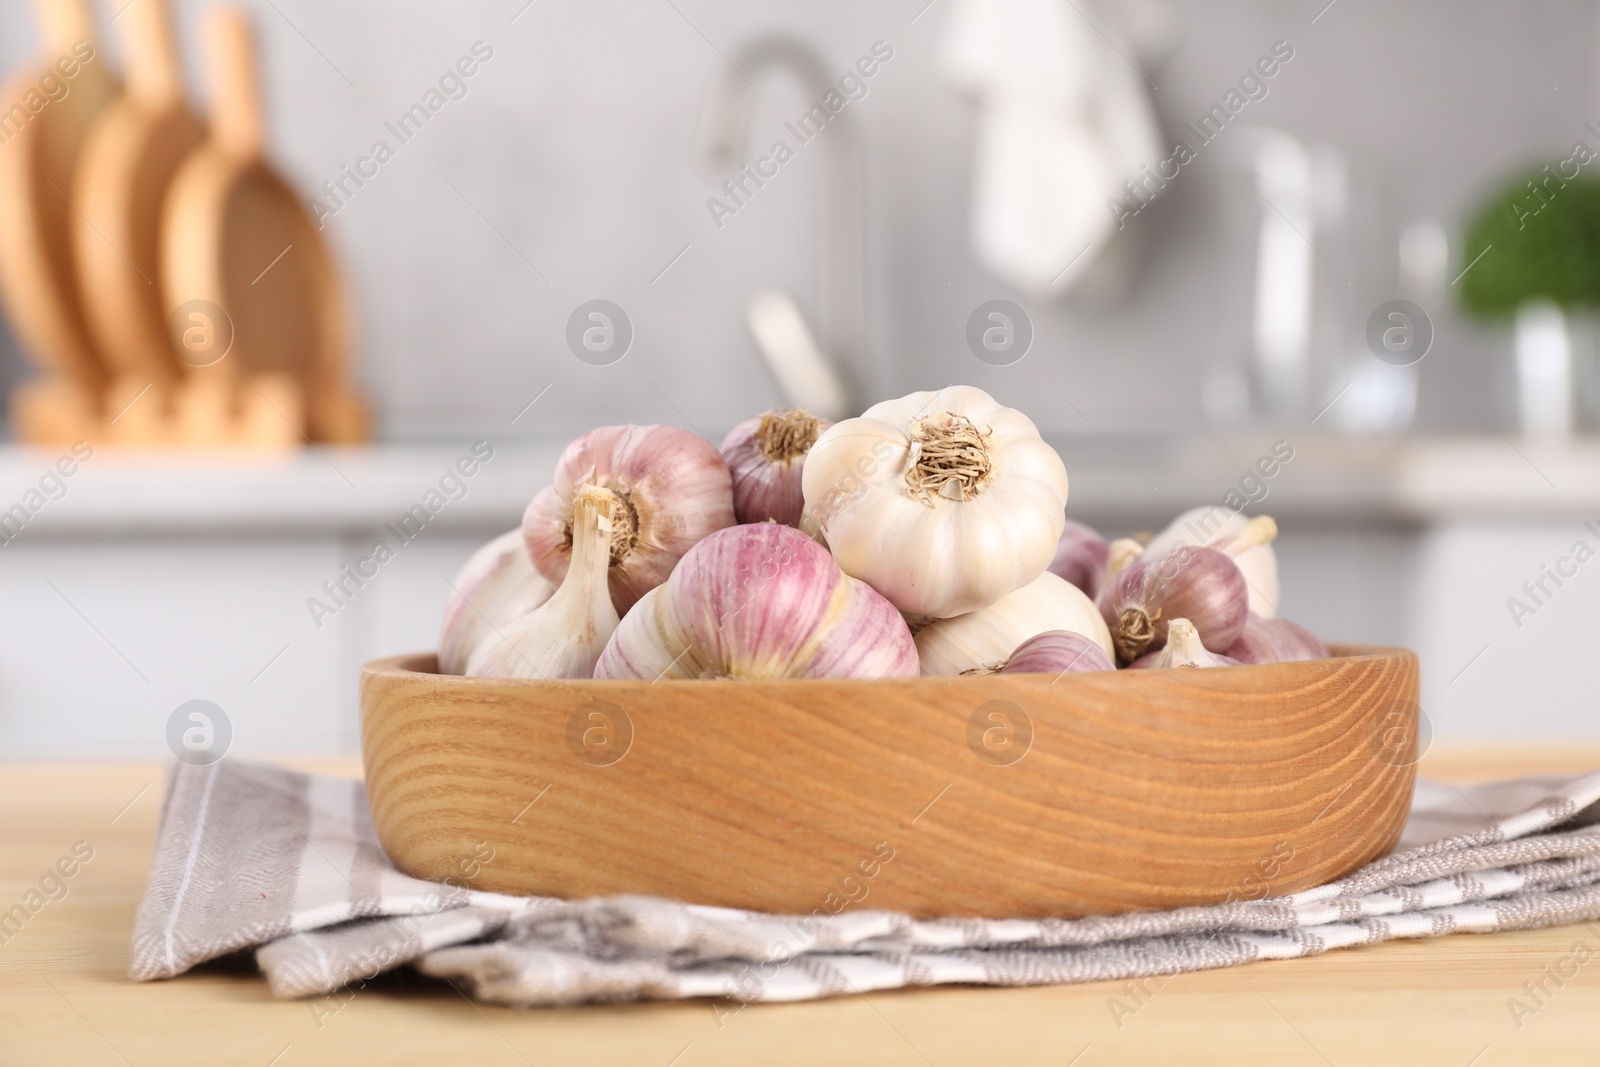 Photo of Bowl of fresh raw garlic on wooden table in kitchen